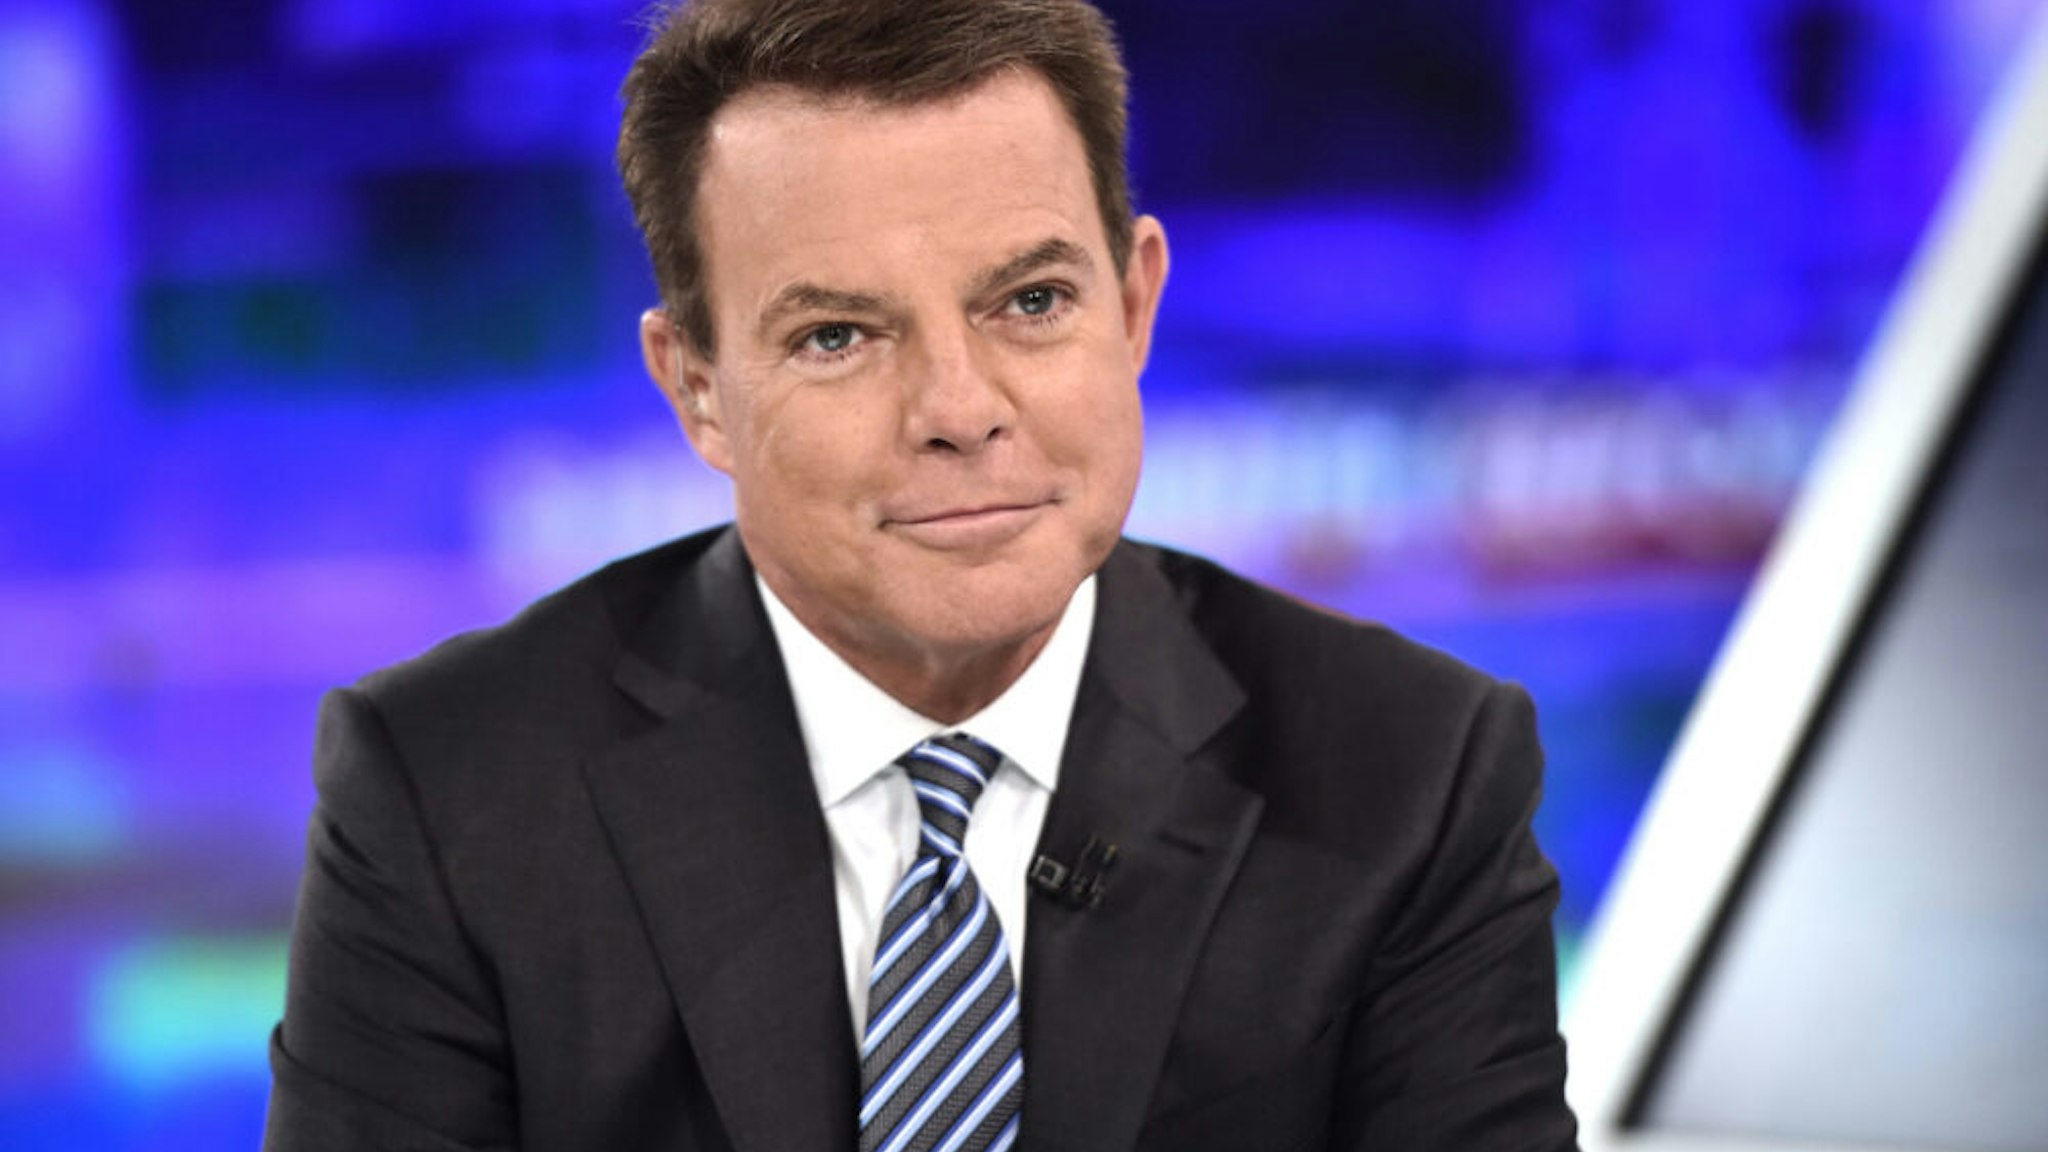 NEW YORK, NEW YORK - SEPTEMBER 17: (EXCLUSIVE COVERAGE) Jane Skinner visits "Shepard Smith Reporting" at Fox News Channel Studios on September 17, 2019 in New York City.